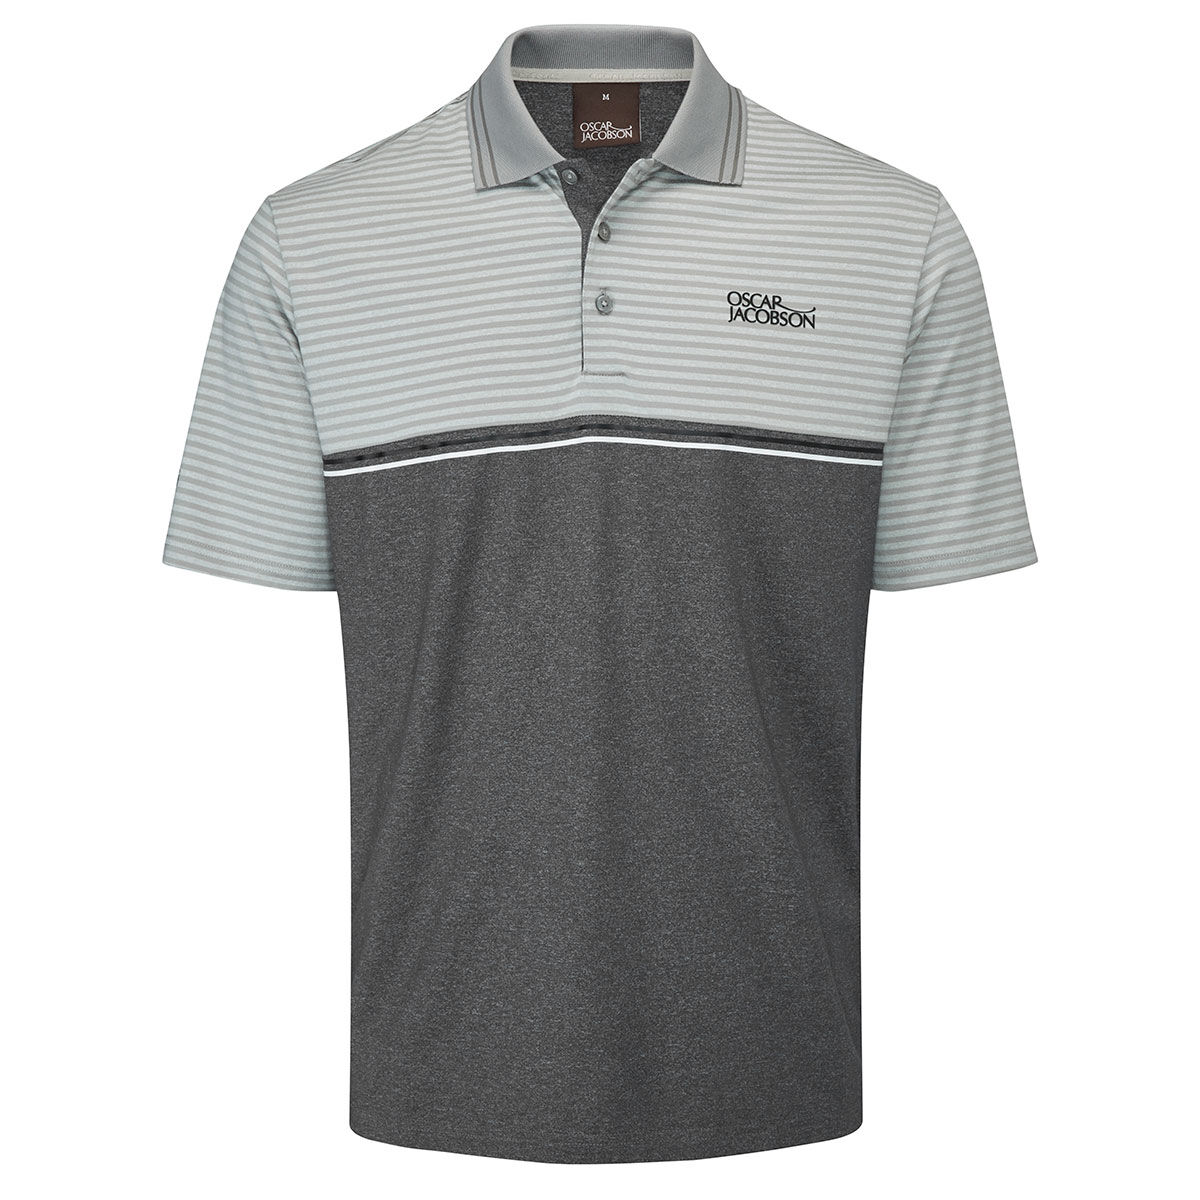 Oscar Jacobson Mens Grey, White and Black Lightweight Stripe Whitby Golf Polo Shirt, Size: Small | American Golf